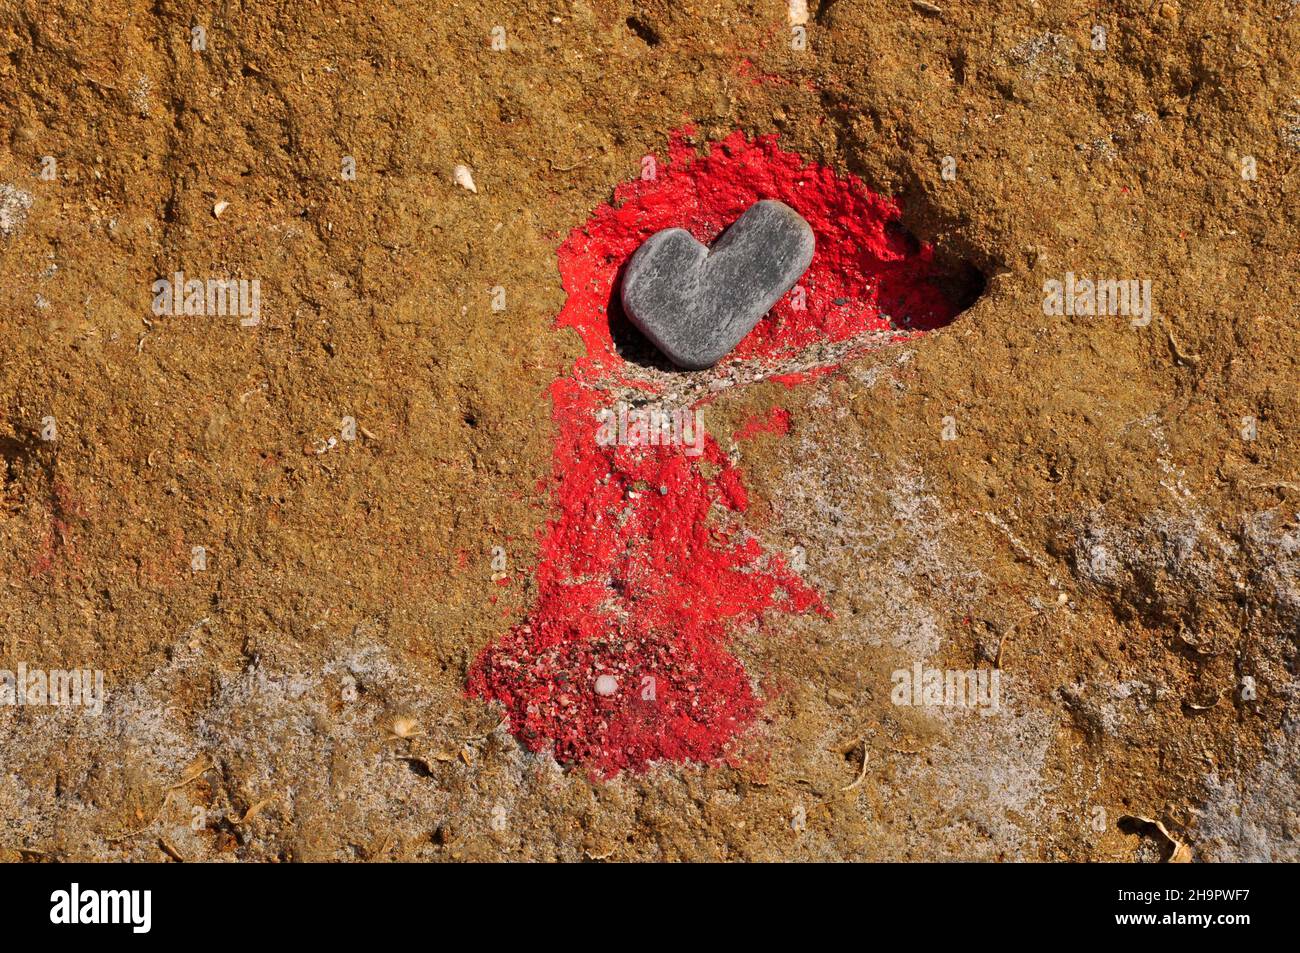 Stone as heart symbol in rocks with red colour, heart shape, symbol of love, sign of love, love symbol, heart of nature, natural heart, proof of Stock Photo